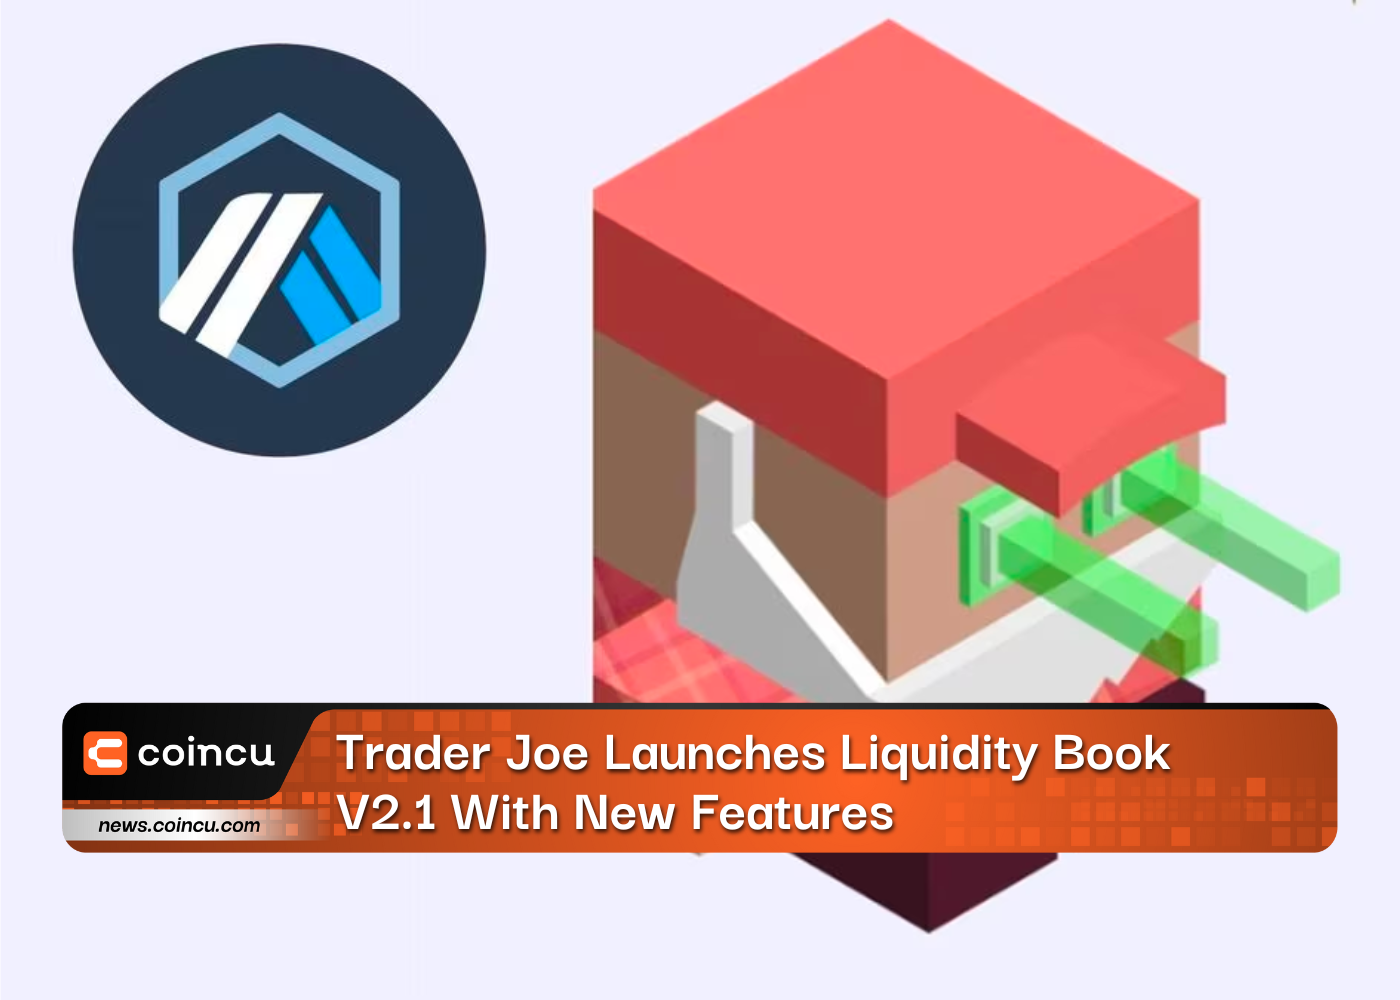 Trader Joe Launches Liquidity Book V2.1 With New Features